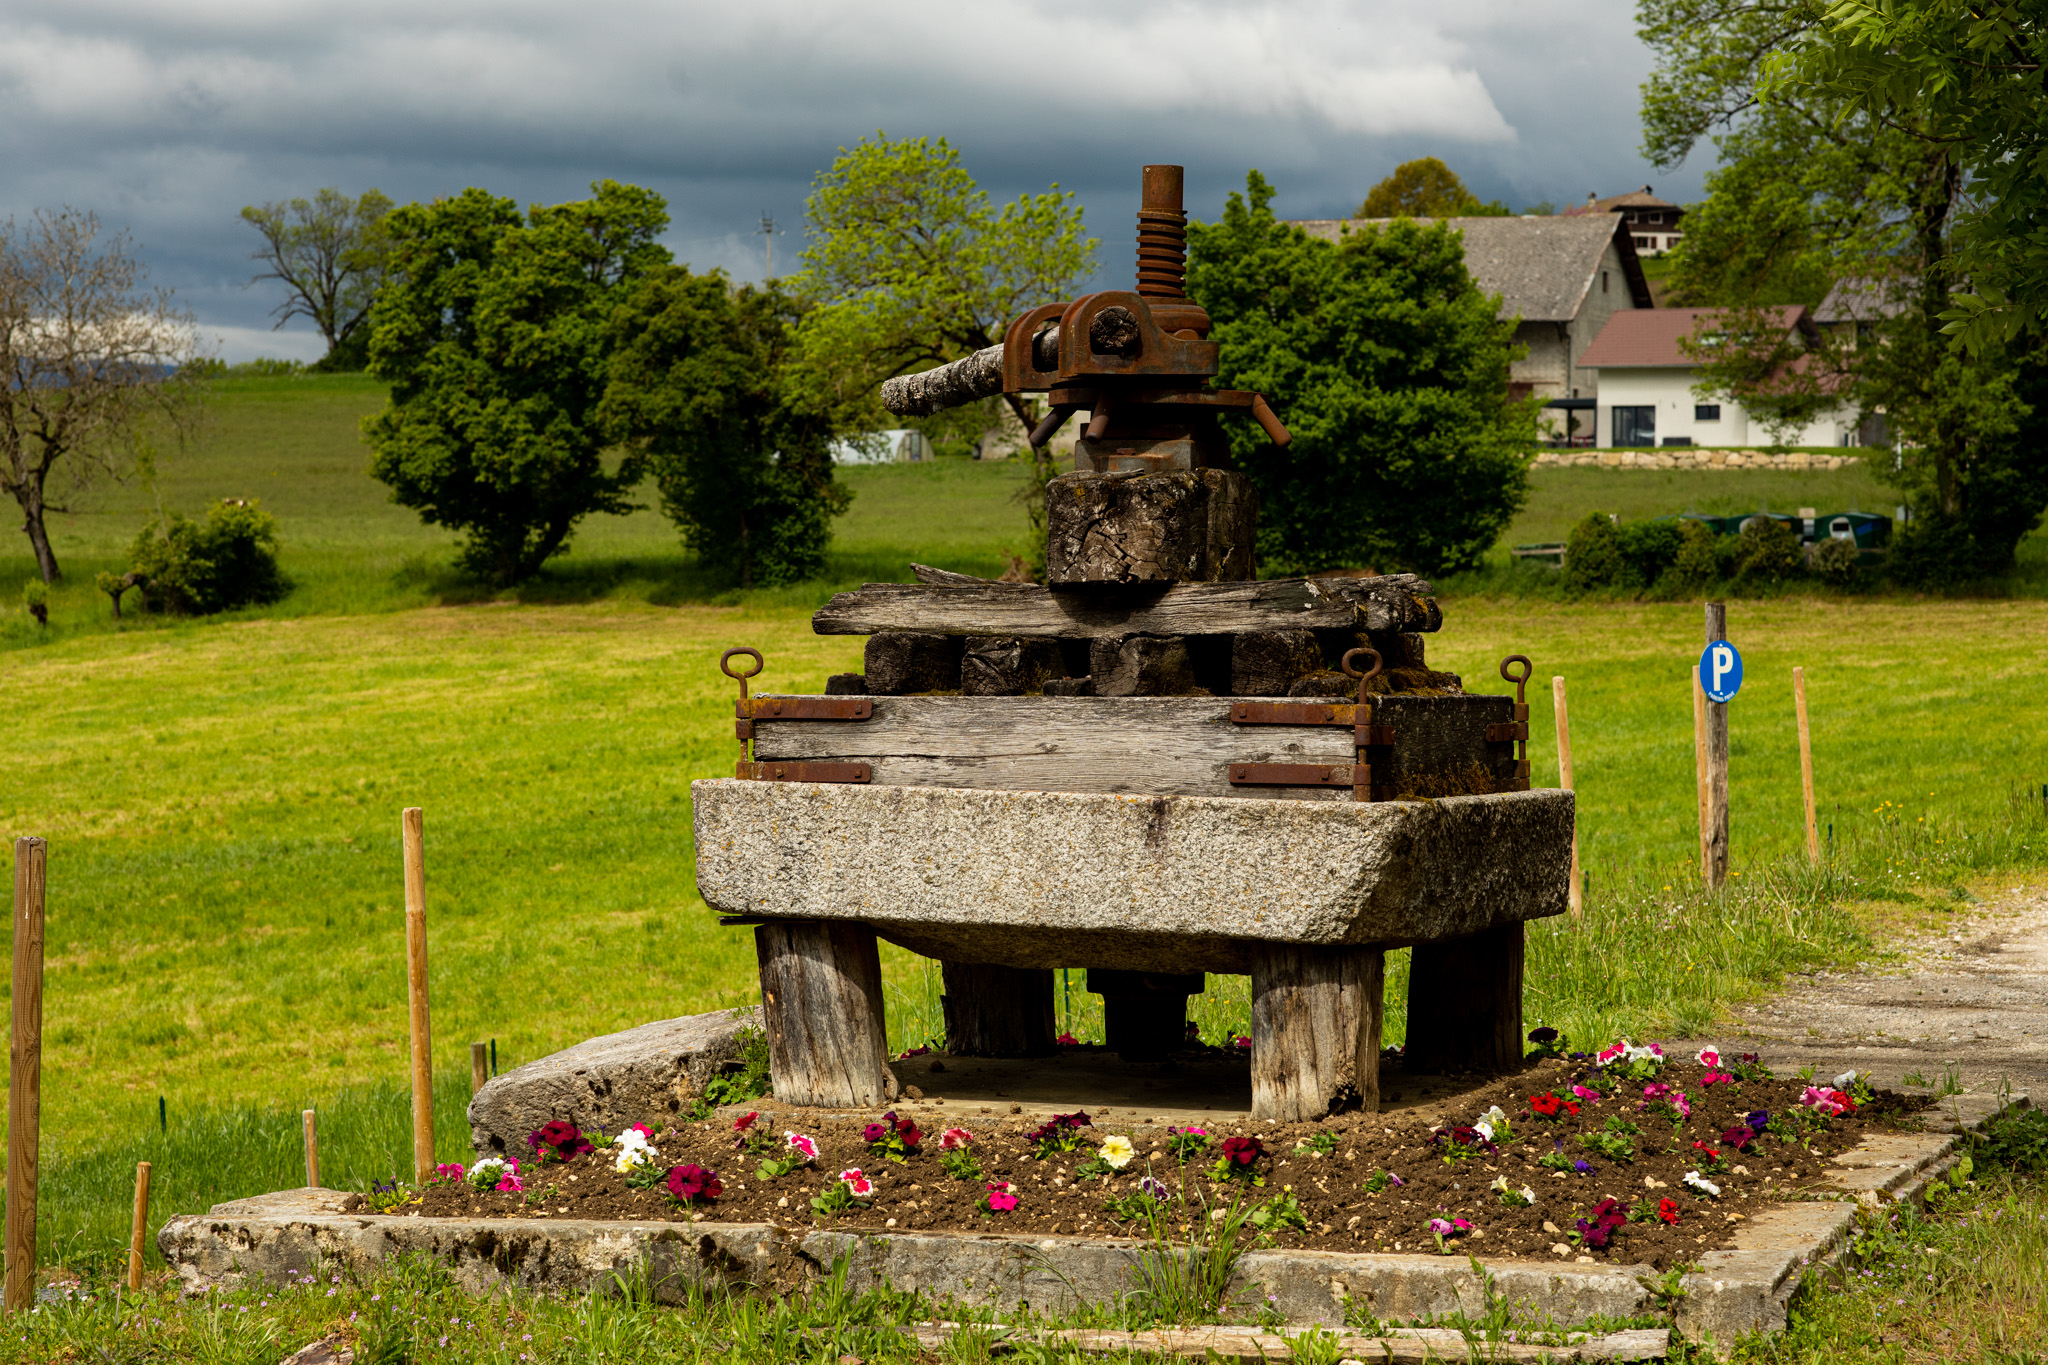 General 2048x1365 trees field photography nature outdoors flowers historical relic machine spring